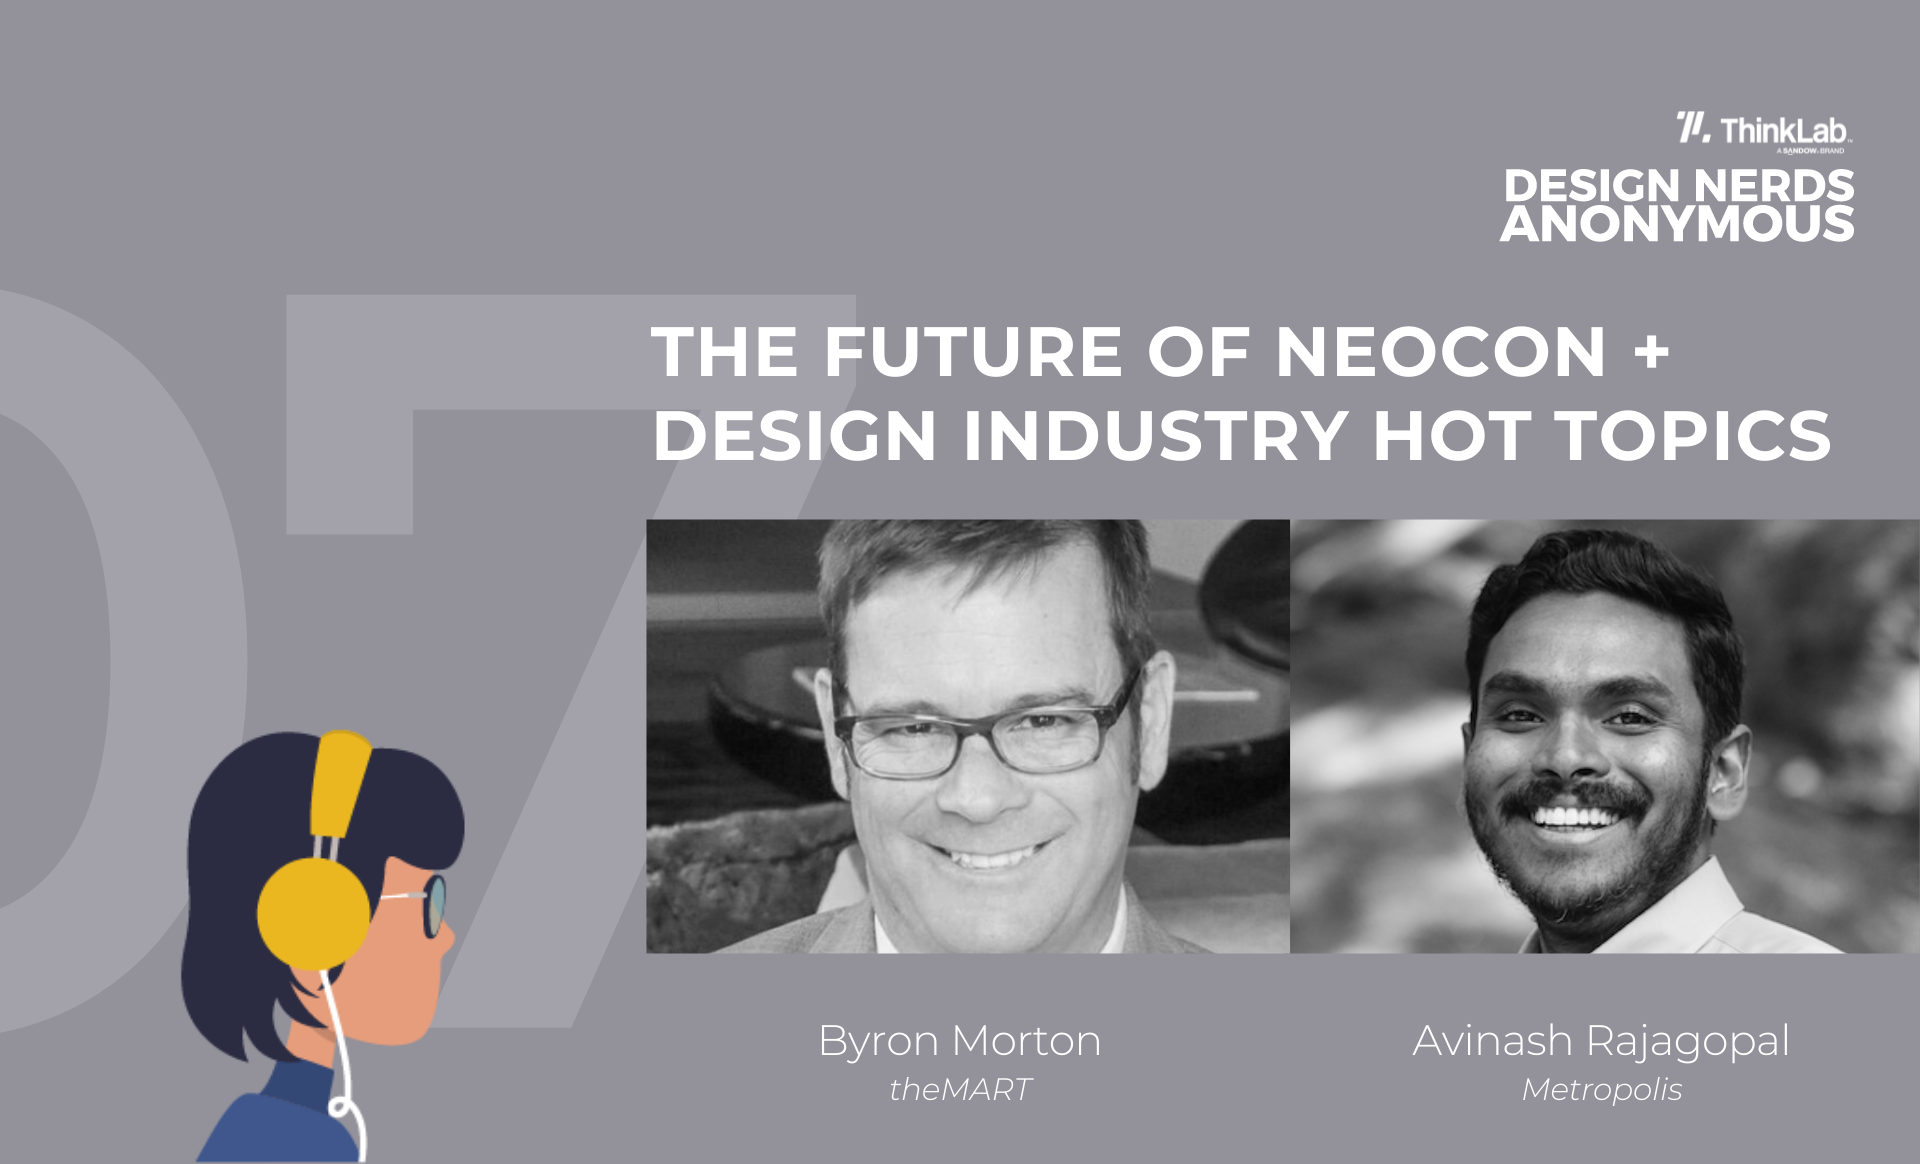 ThinkLab Design Nerds Anonymous Podcast on The Future of NeoCon Shows 